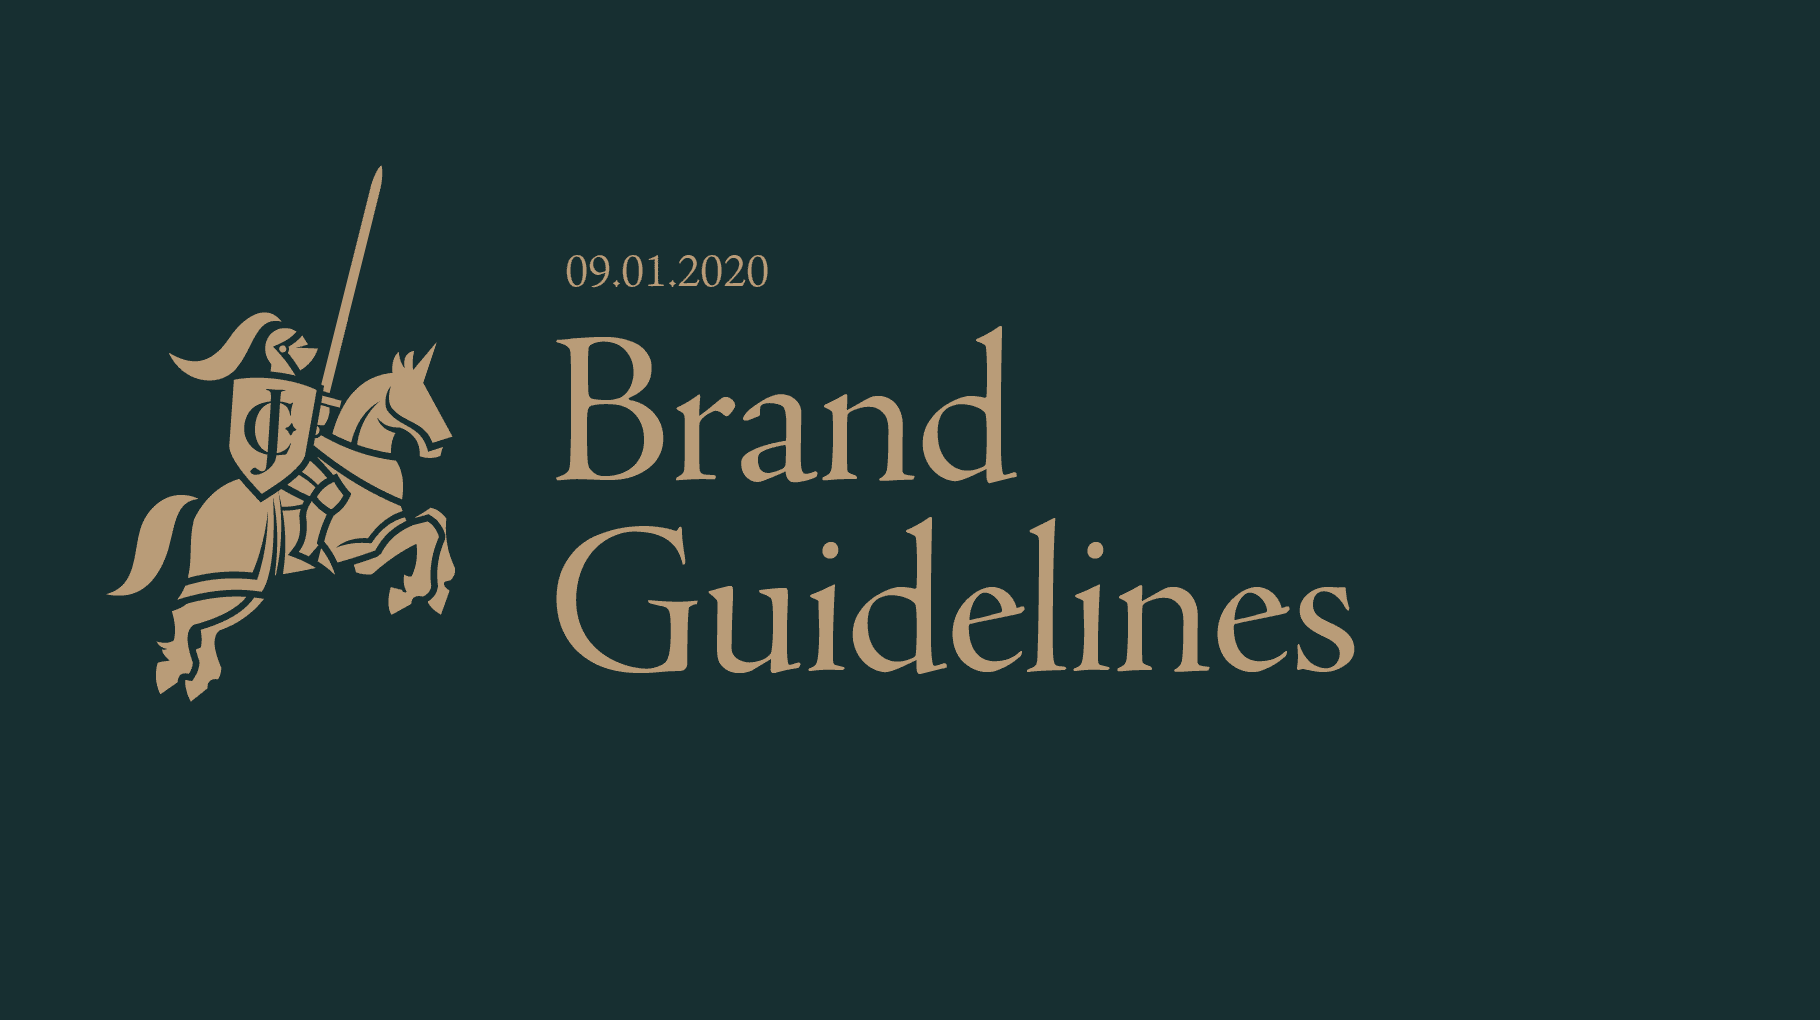 jc law brand guidelines